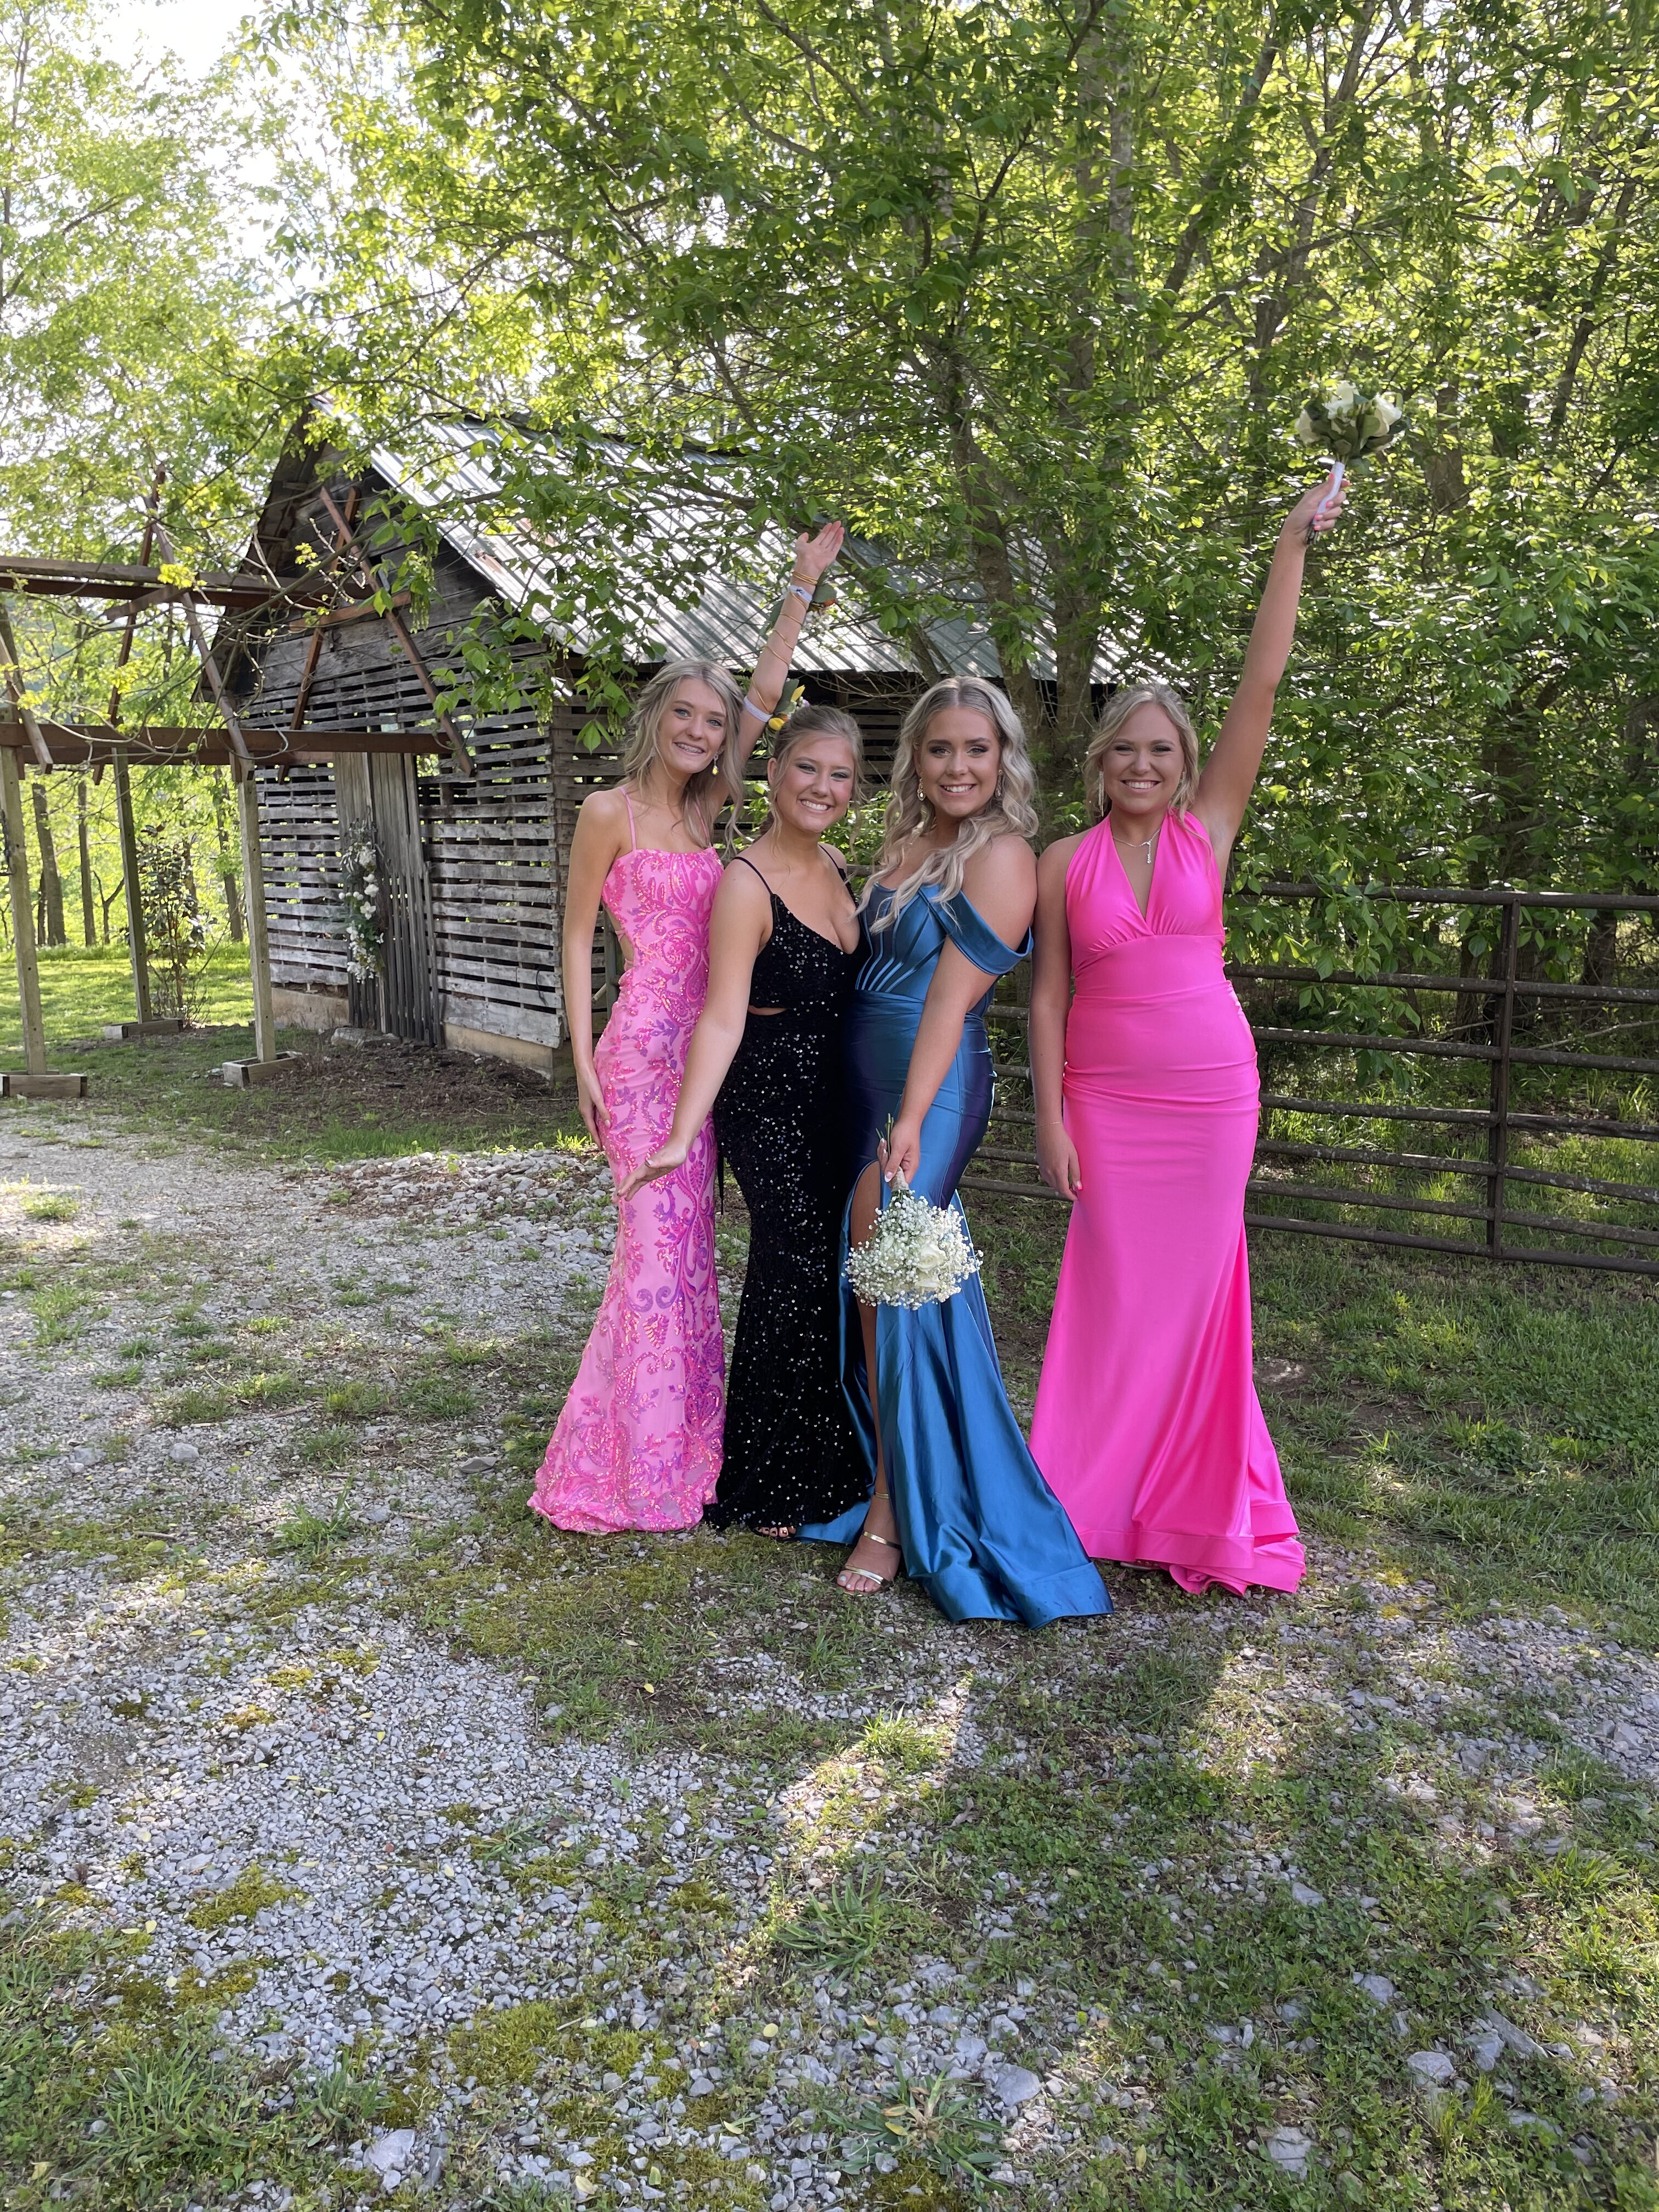 Four women dressed for Prom outside the historic outbuilding on the grounds of Hayes House